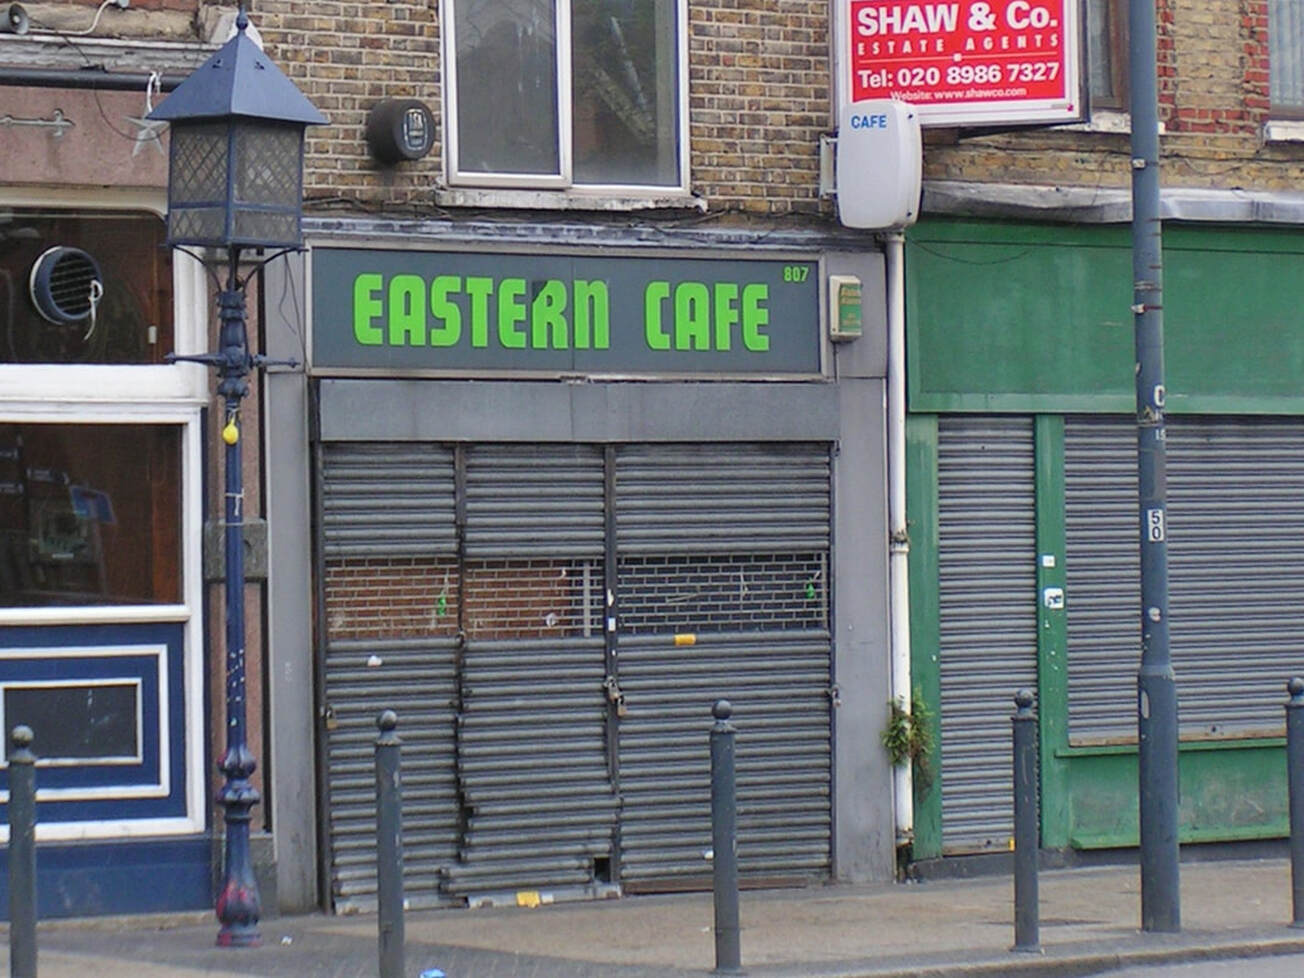 The shuttered exterior of the Eastern Cafe on the Commercial Road next to the old gas lamp of the Star of the East public house